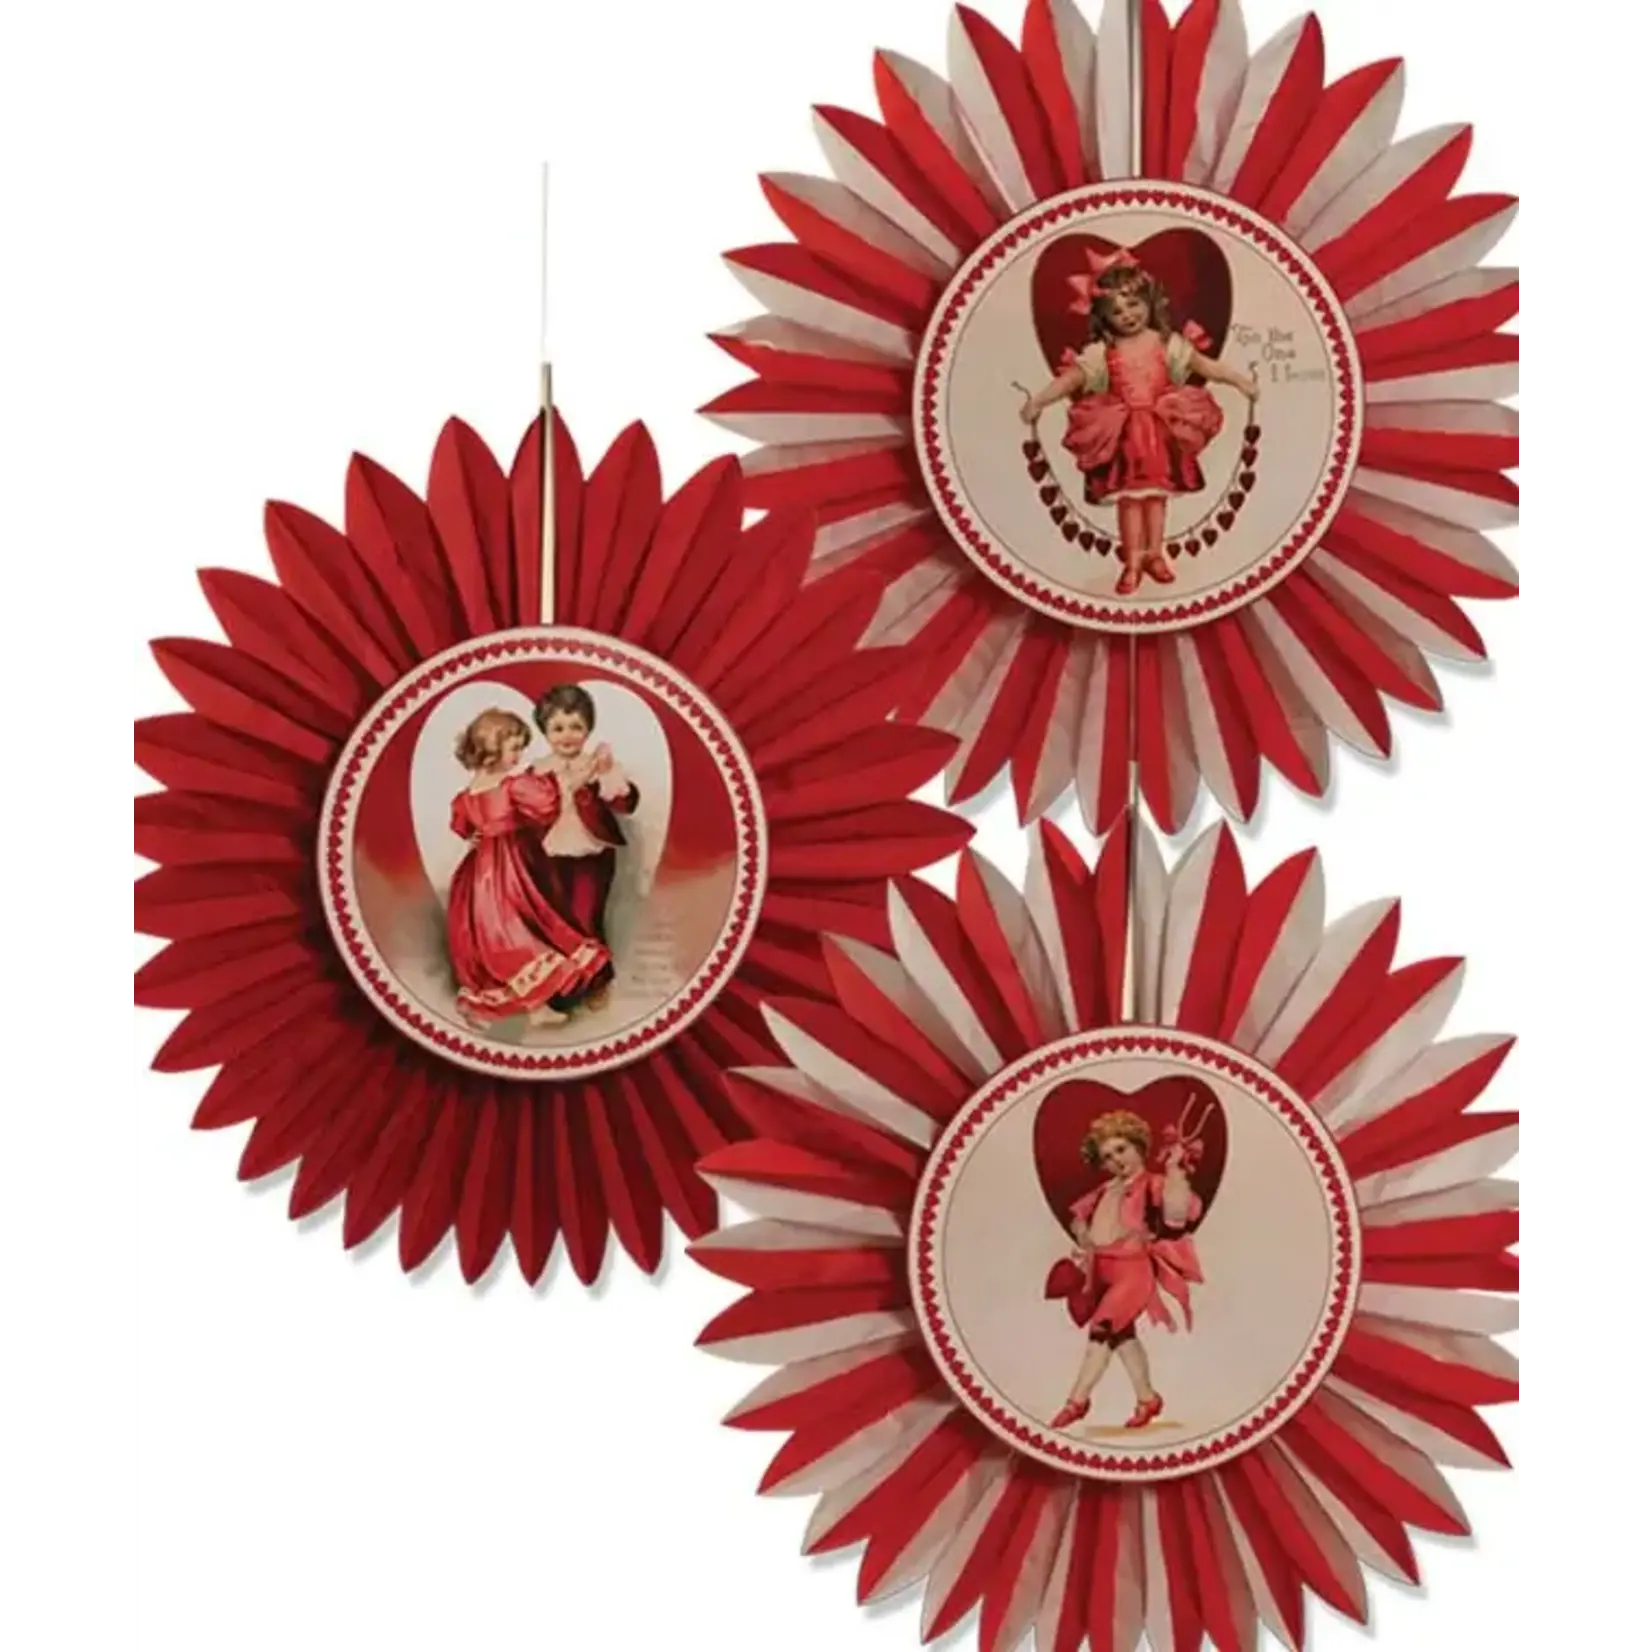 Bethany Lowe Valentines Day Rosette